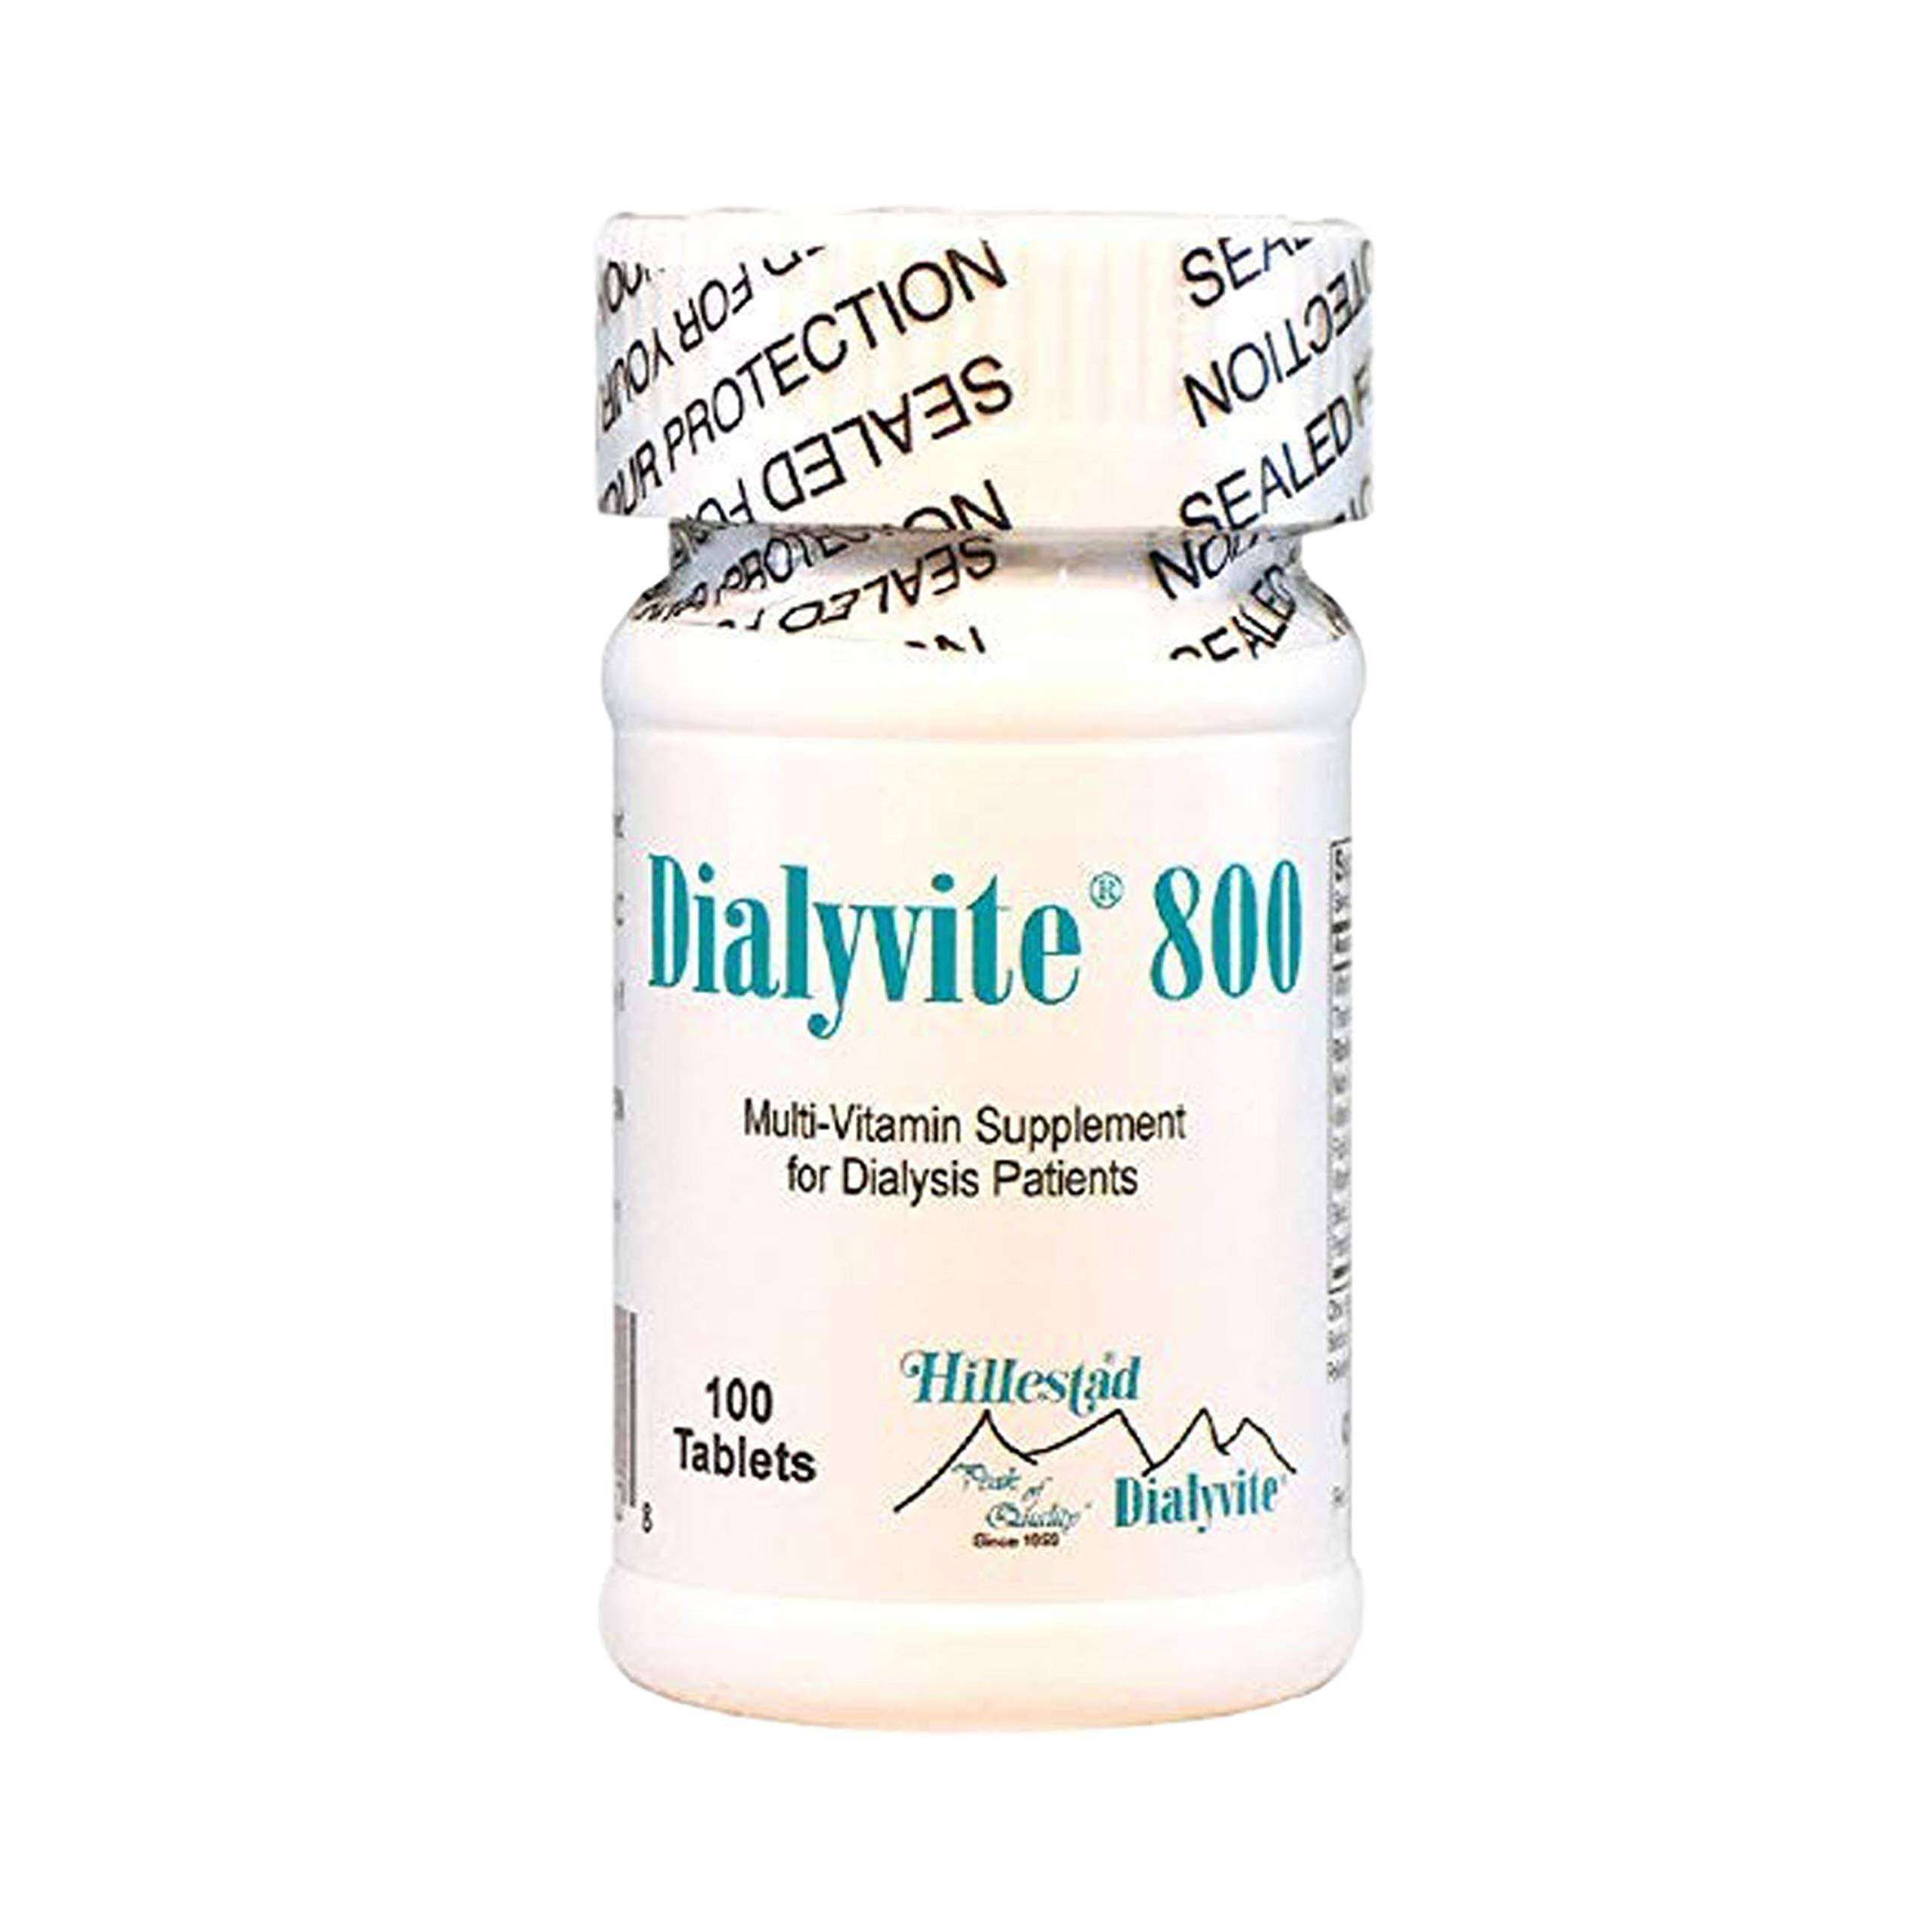 Dialyvite 800 Mcg 100 Tablets Multi-Vitamin Suppliment for Dialysis Patients